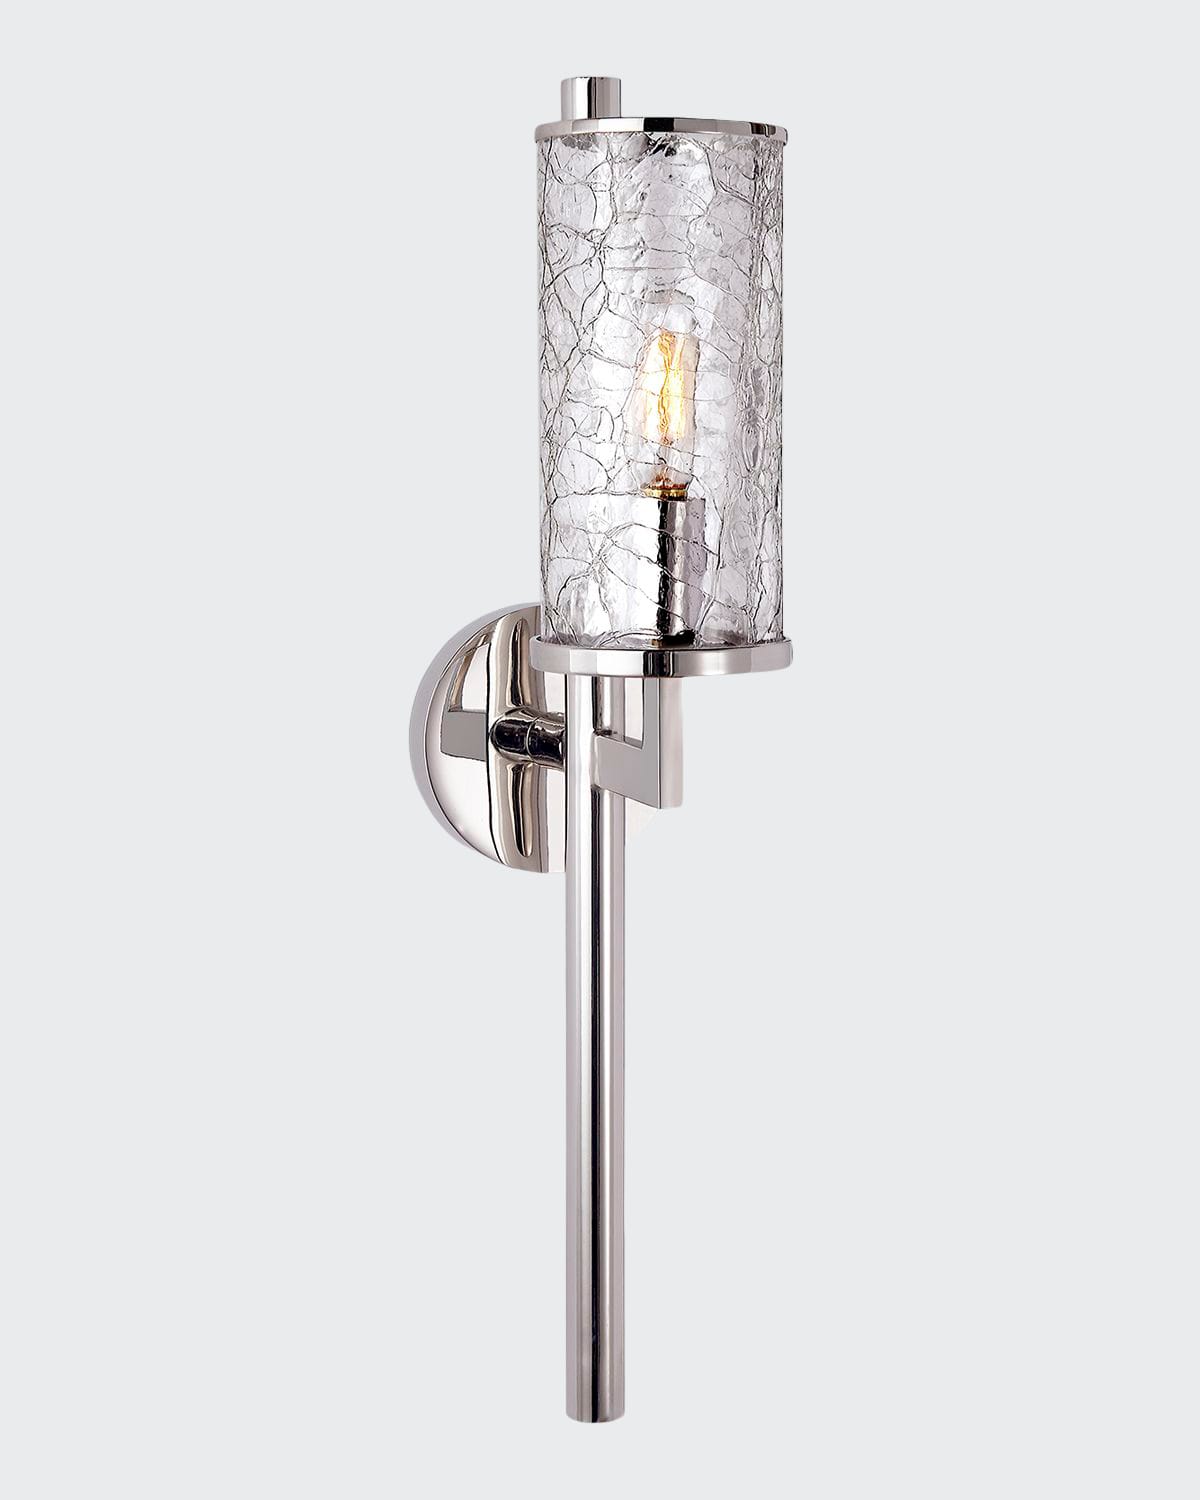 Kelly Wearstler For Visual Comfort Signature Liaison Single Sconce In Polished Nickel